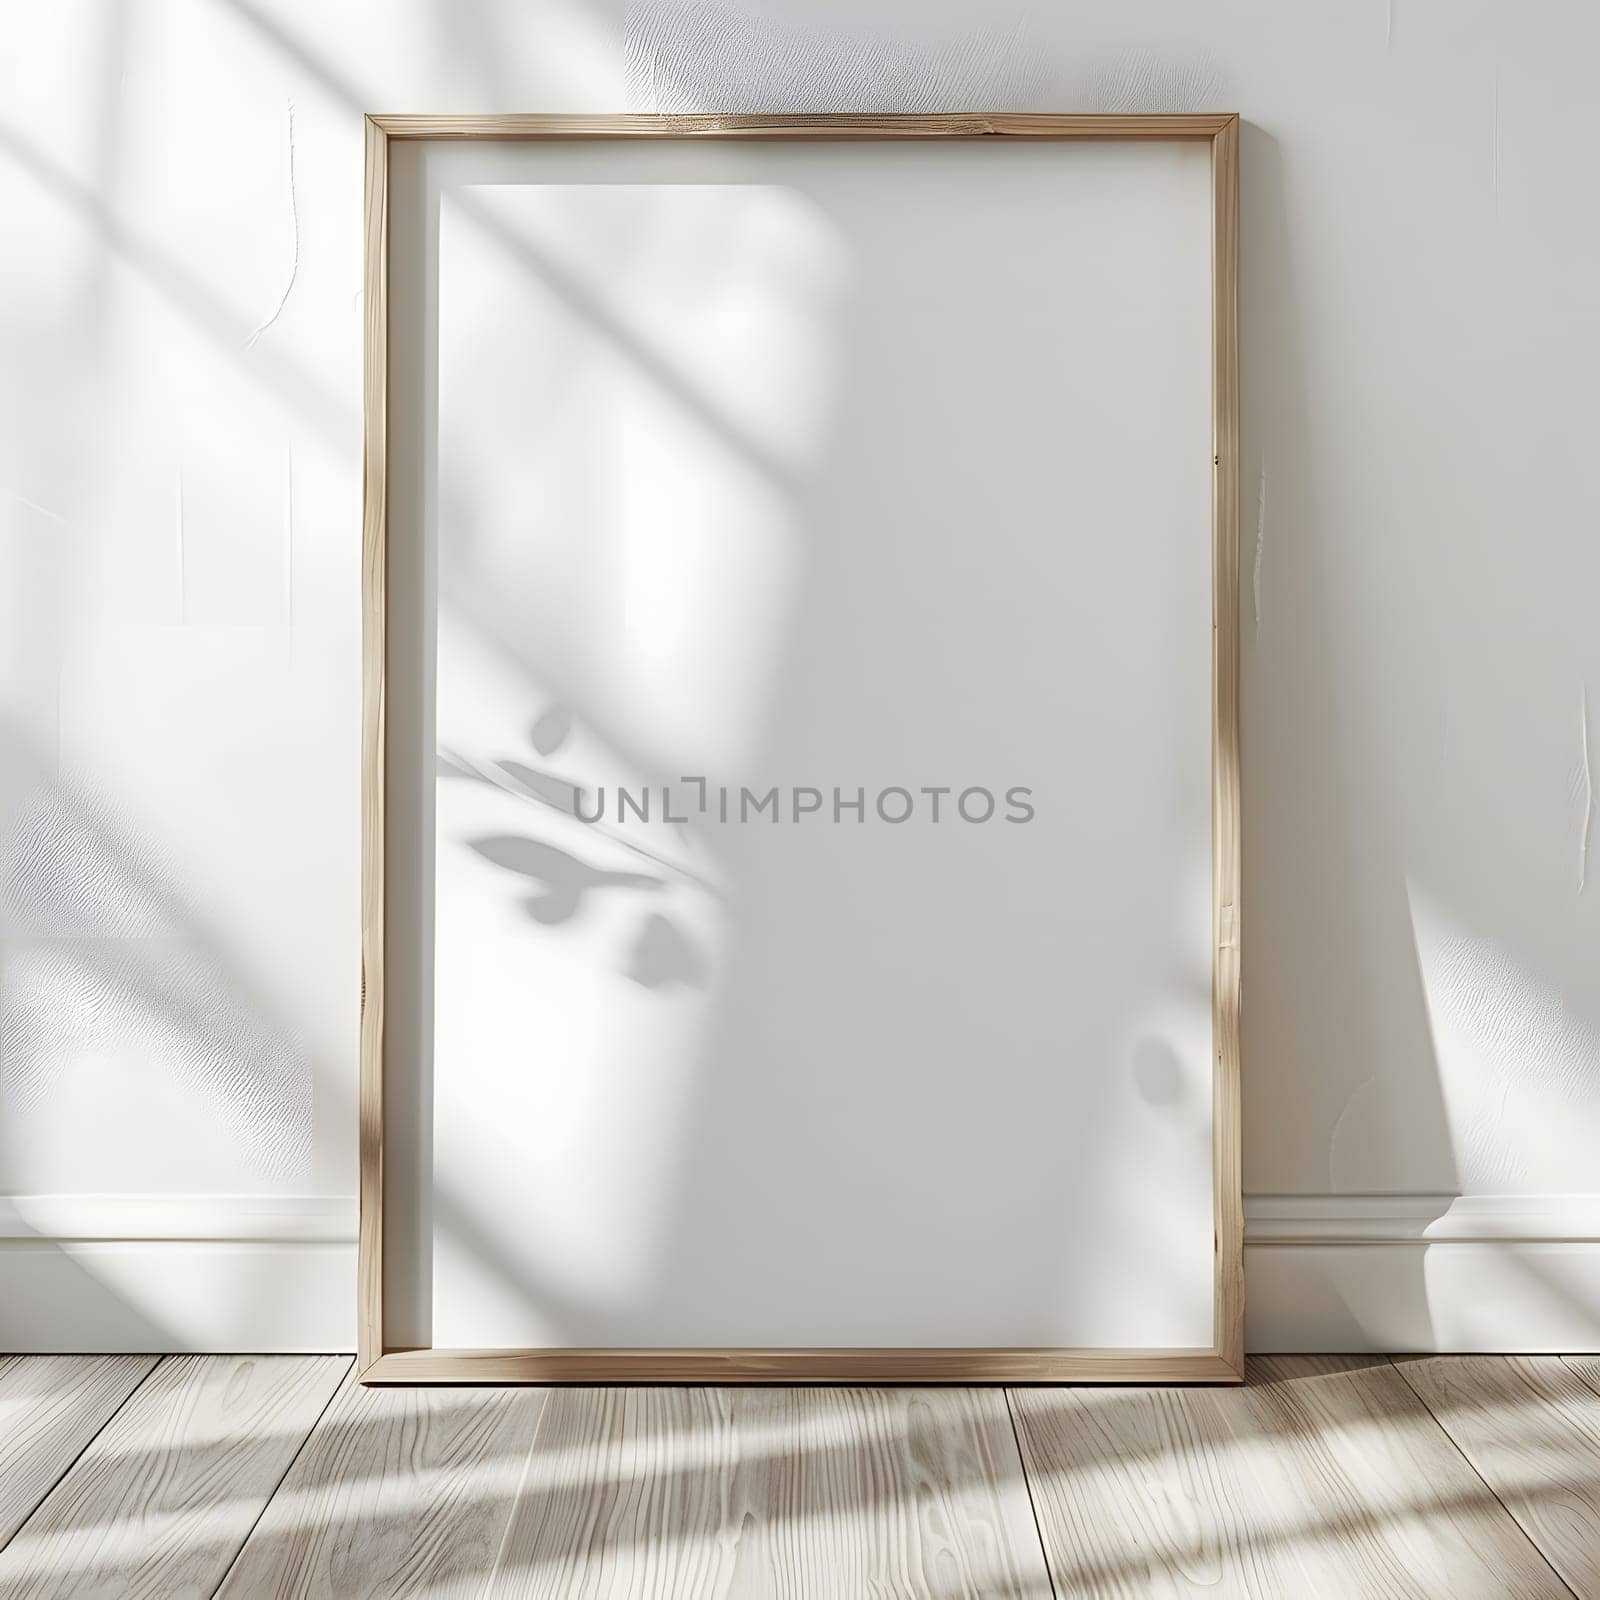 A rectangle picture frame with grey tints and shades is placed on a hardwood flooring next to a white wall. The transparent glass adds a touch of elegance to the art piece